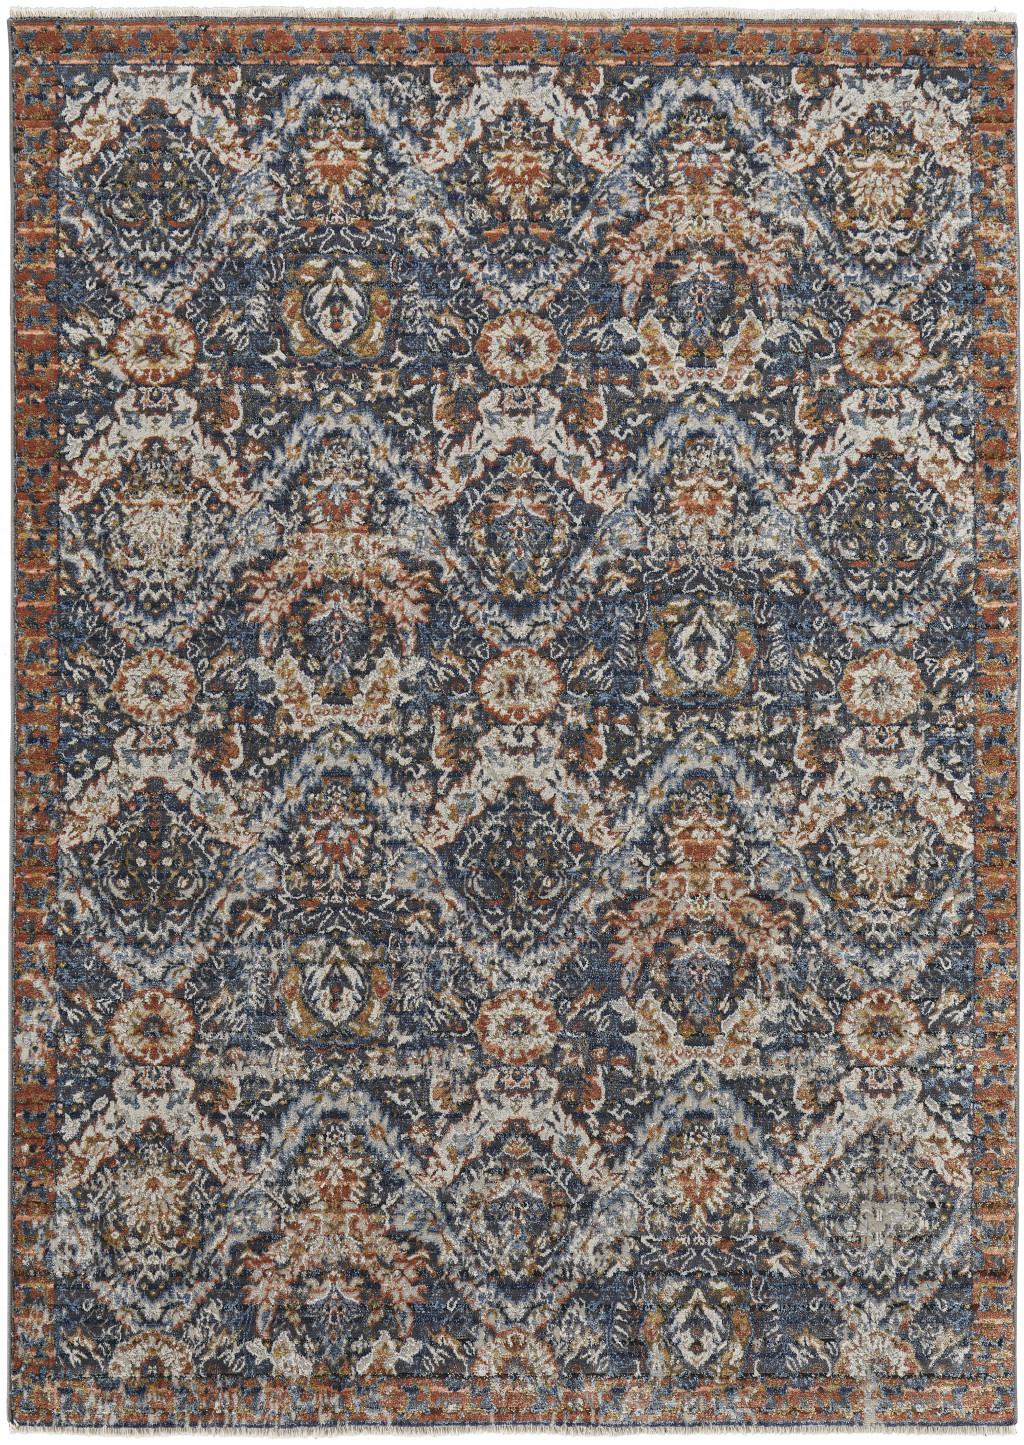 2' X 3' Blue Orange And Ivory Floral Power Loom Area Rug With Fringe-513997-1